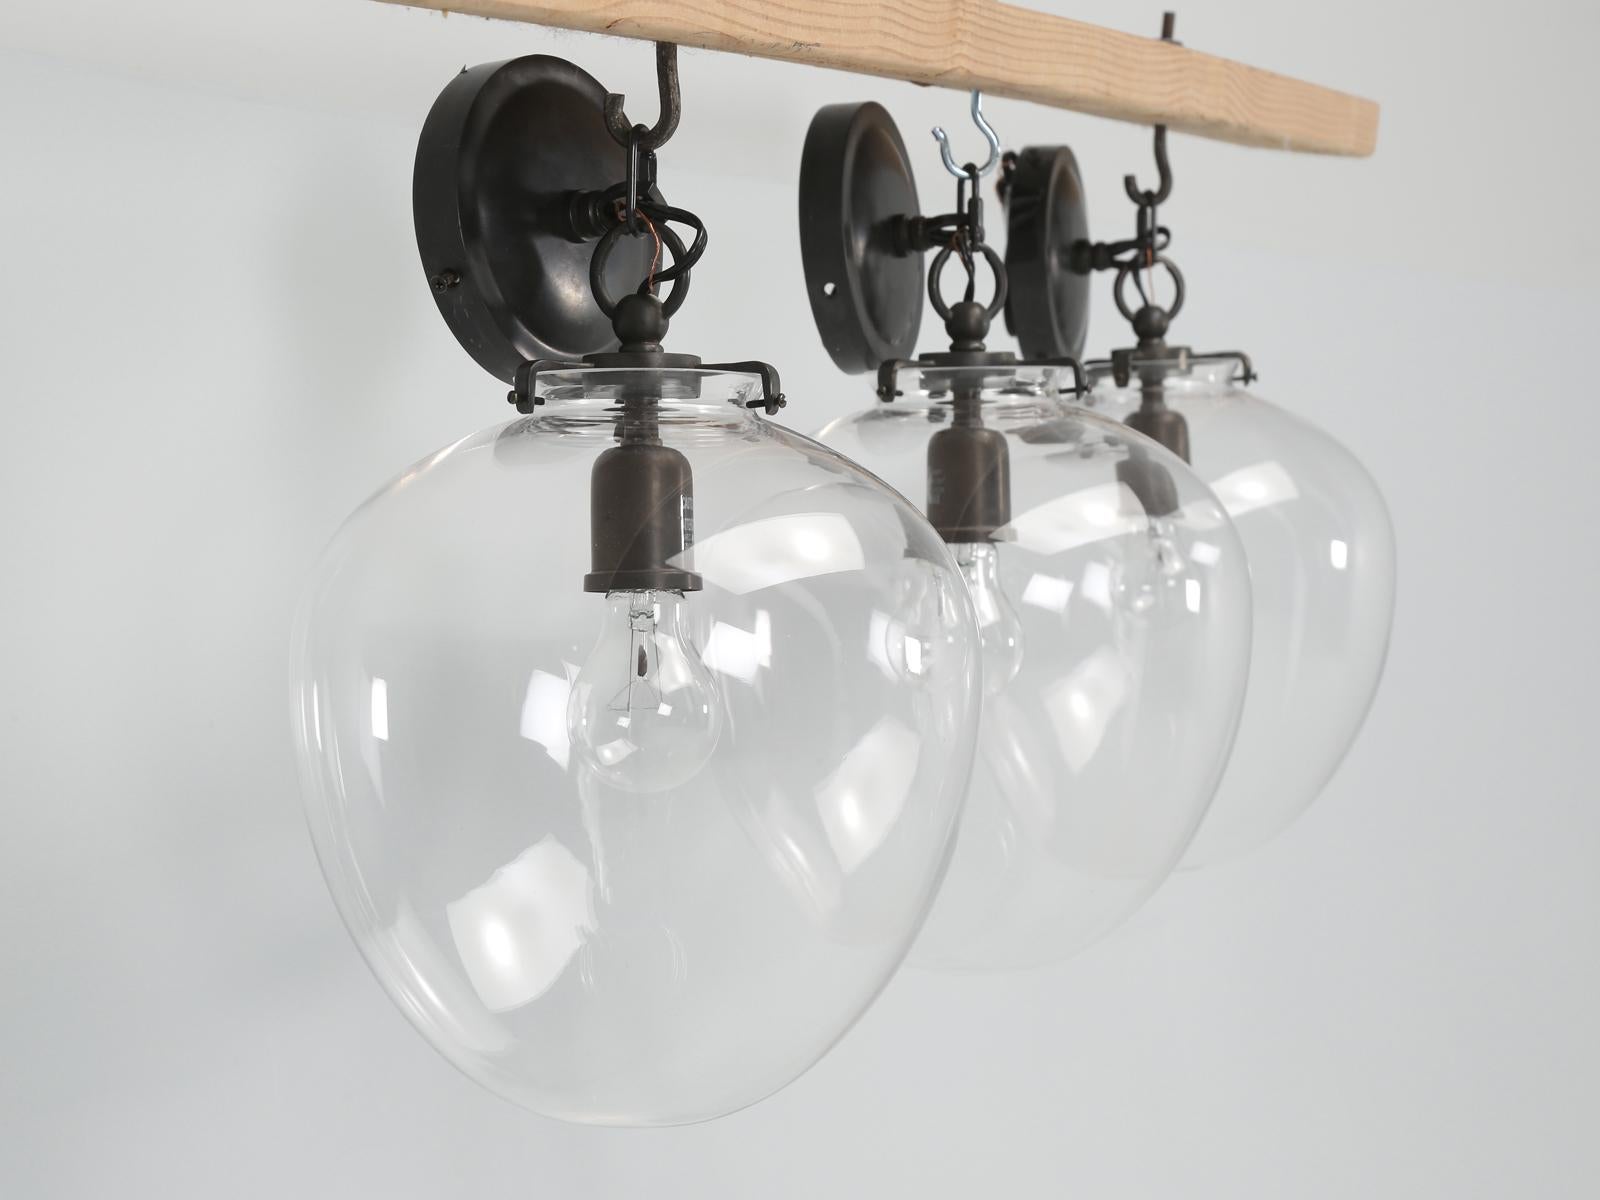 The set of (3) Ceiling Pendant Globe lights were produced by Circa Lighting / Thomas O’Brien Katie Acorn Pendant in dark bronze with clear globes. This set of (3) pendants were purchased and never installed. 
**Height provided includes the chain